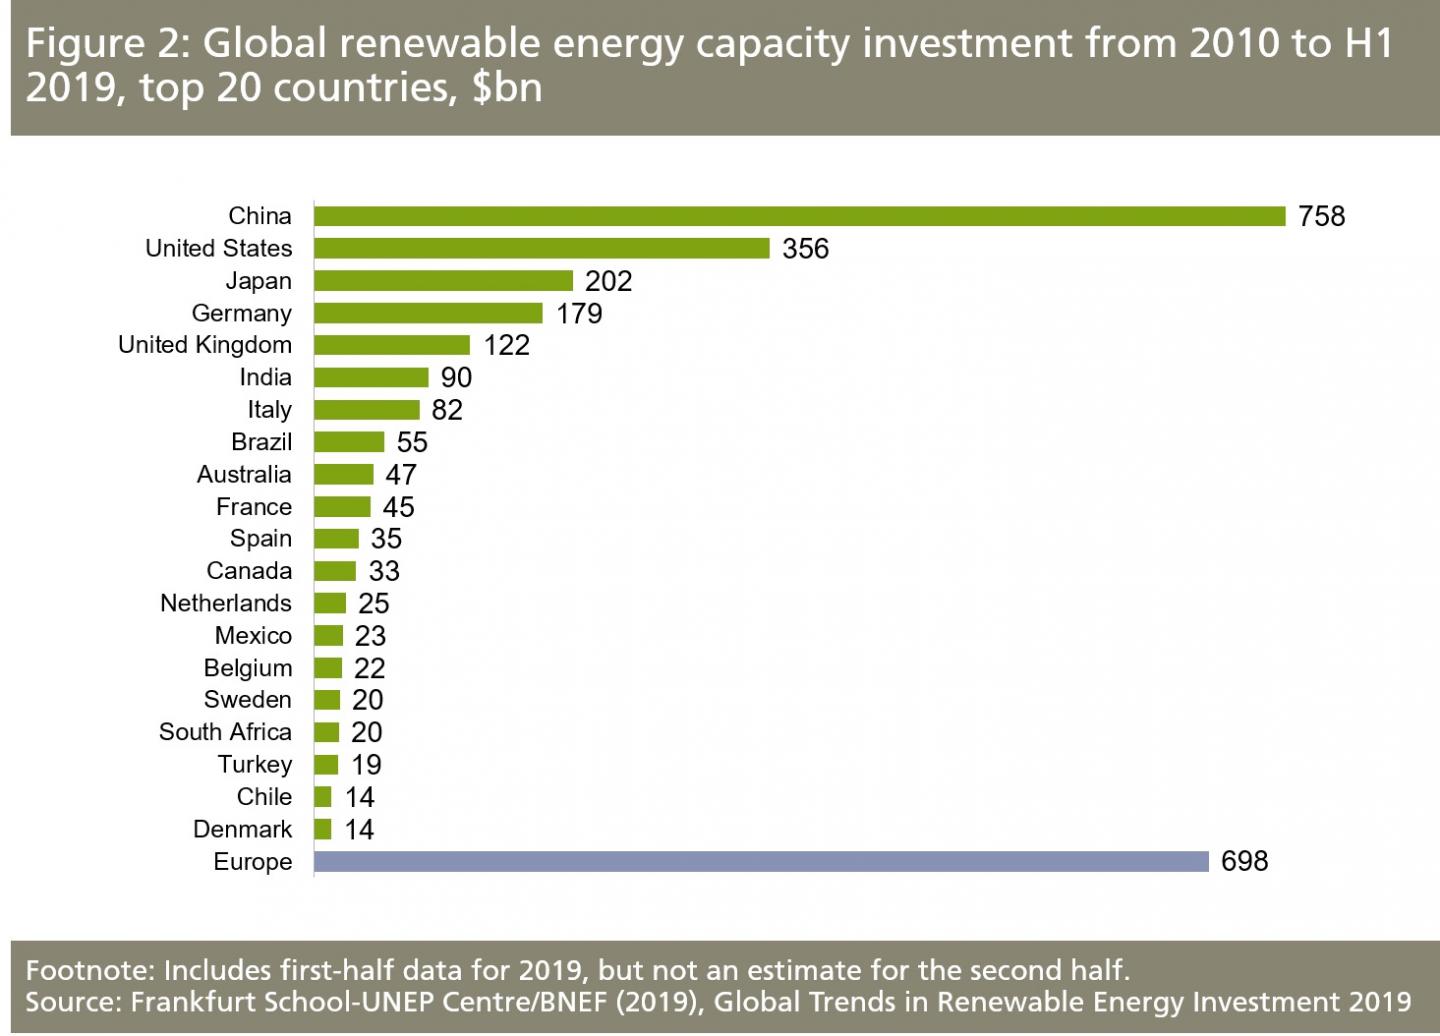 Global Renewable Energy Capacity Investment from 2010 to 2019 - Top 20 Countries